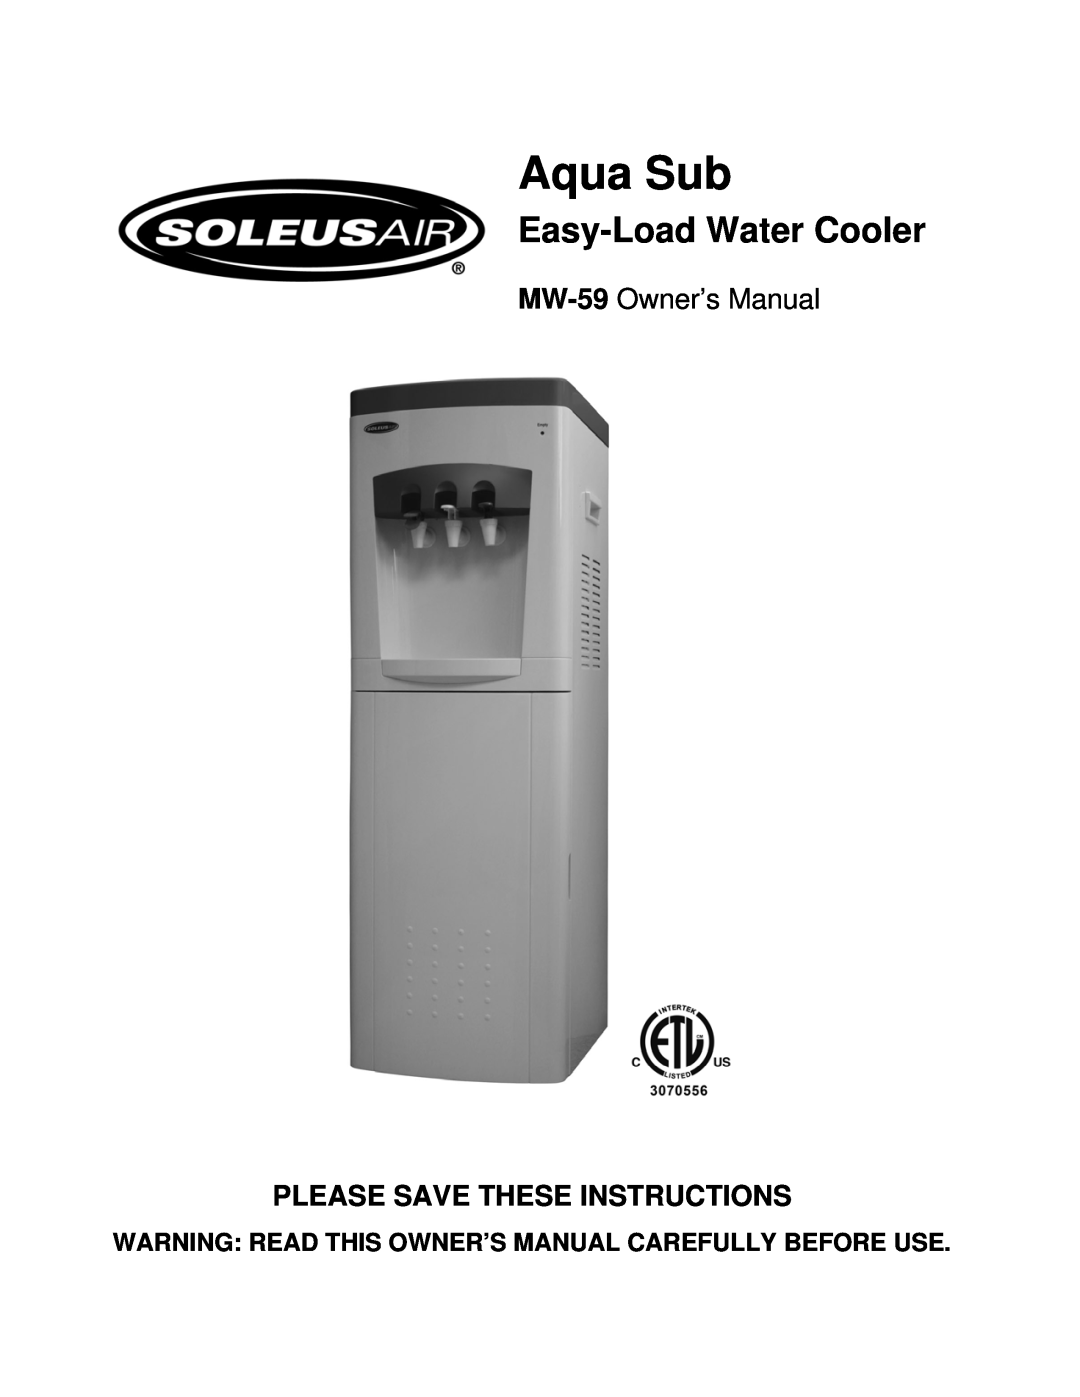 Soleus Air Aqua Sub MW-59 owner manual Easy-LoadWater Cooler, Please Save These Instructions 